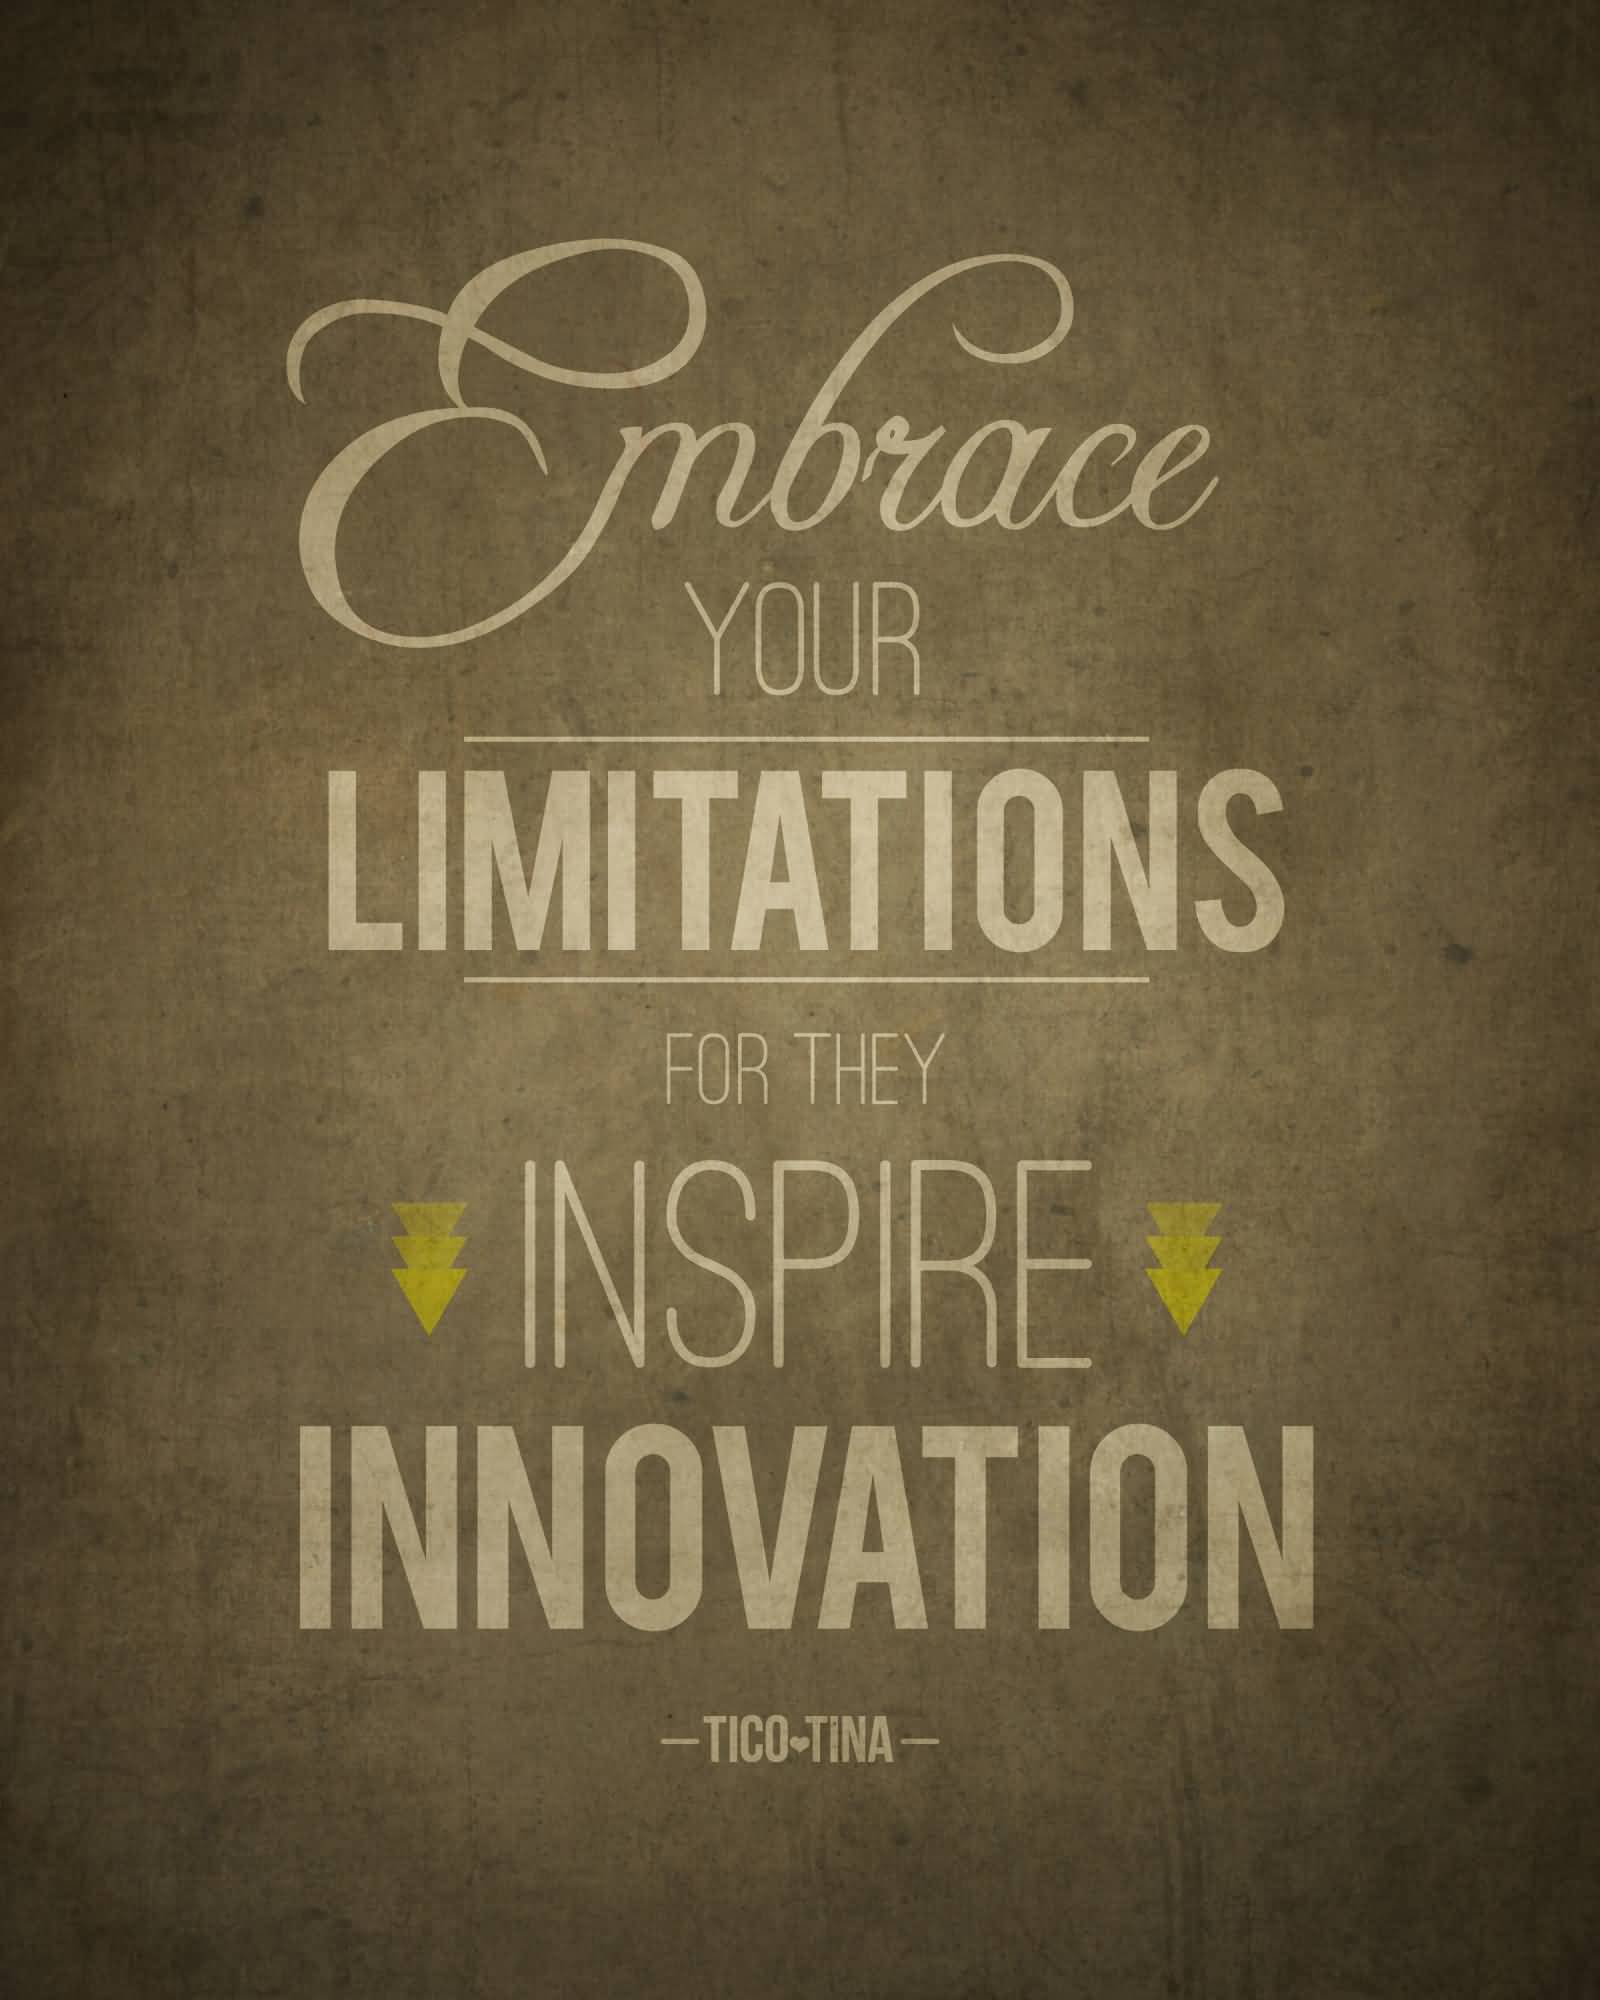 Embrace your limitations, for they inspire innovation